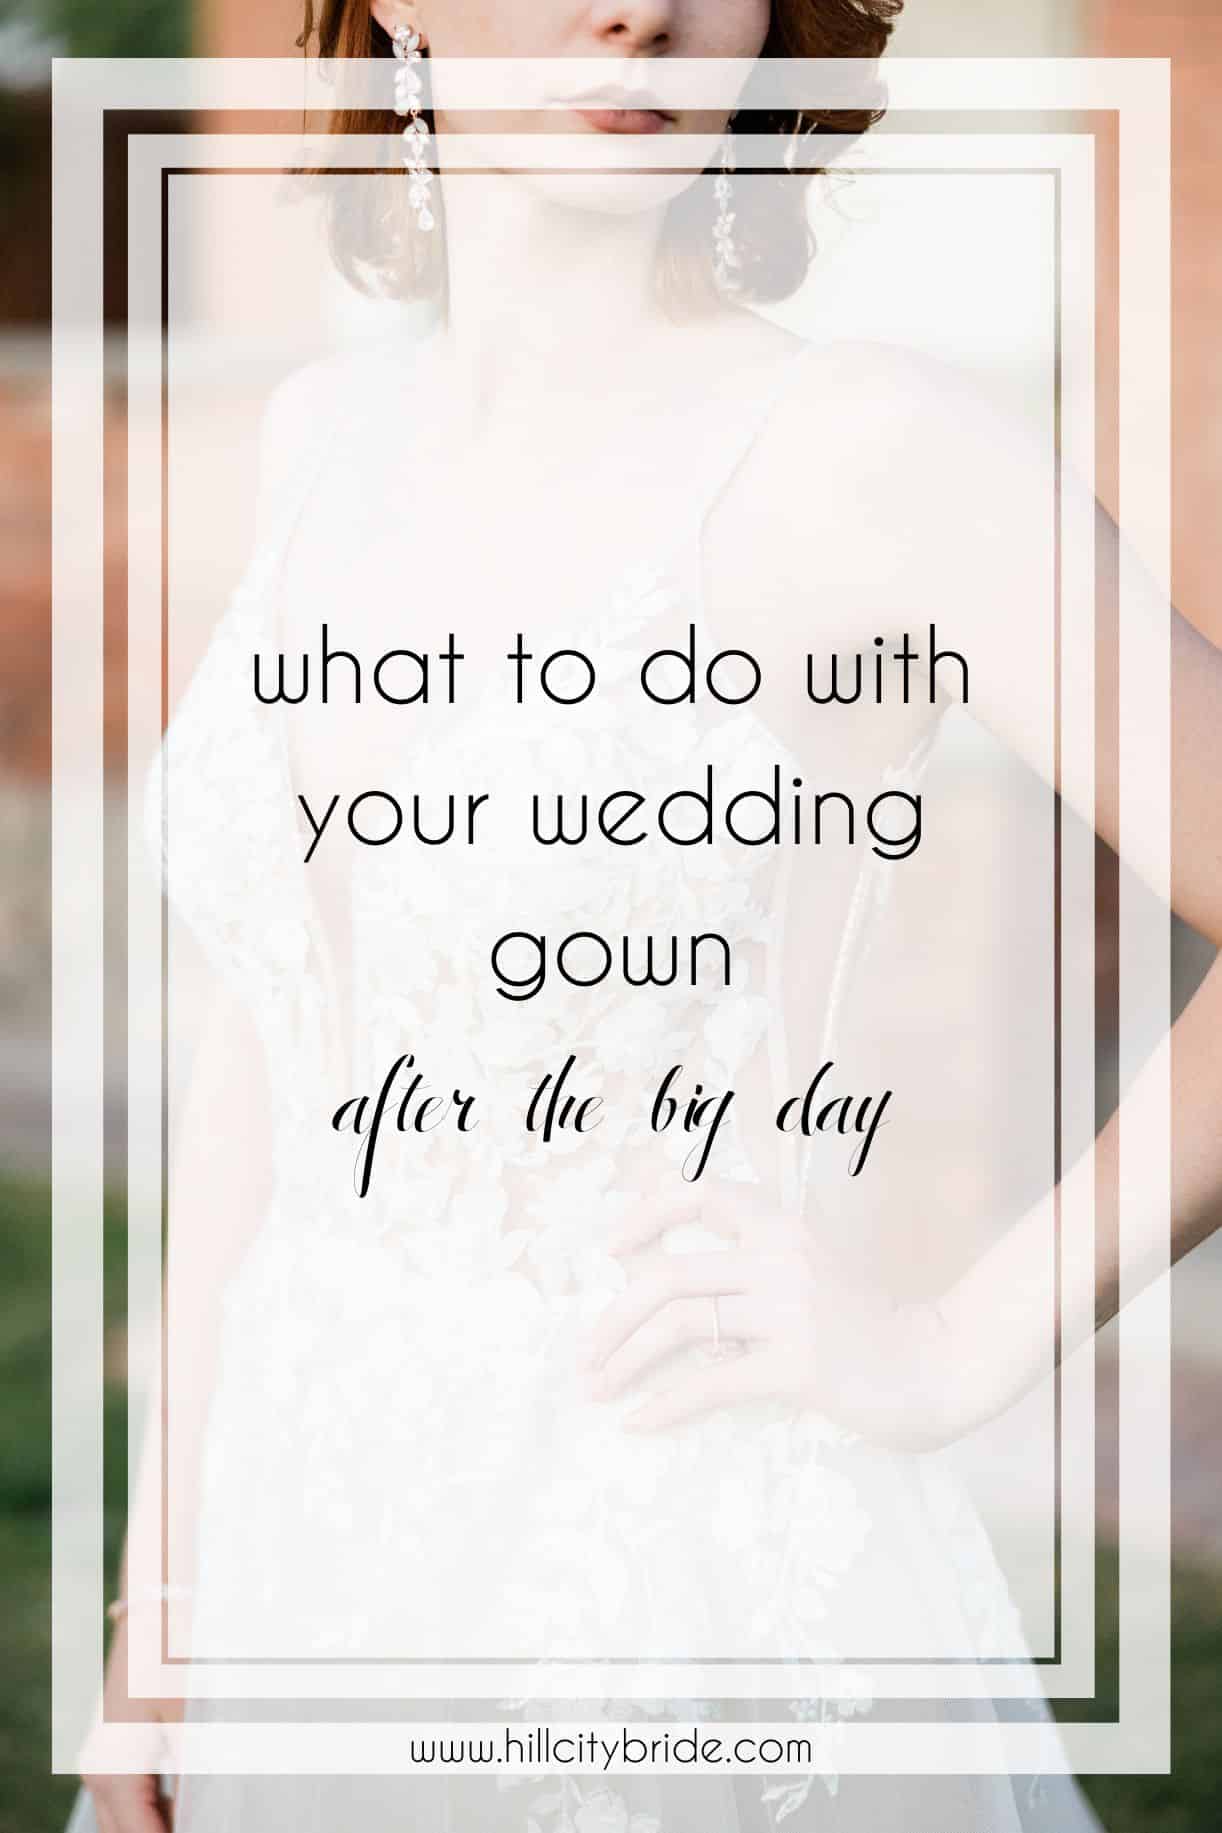 5 Smart Things to Do With Your Wedding Dress After the Big Day